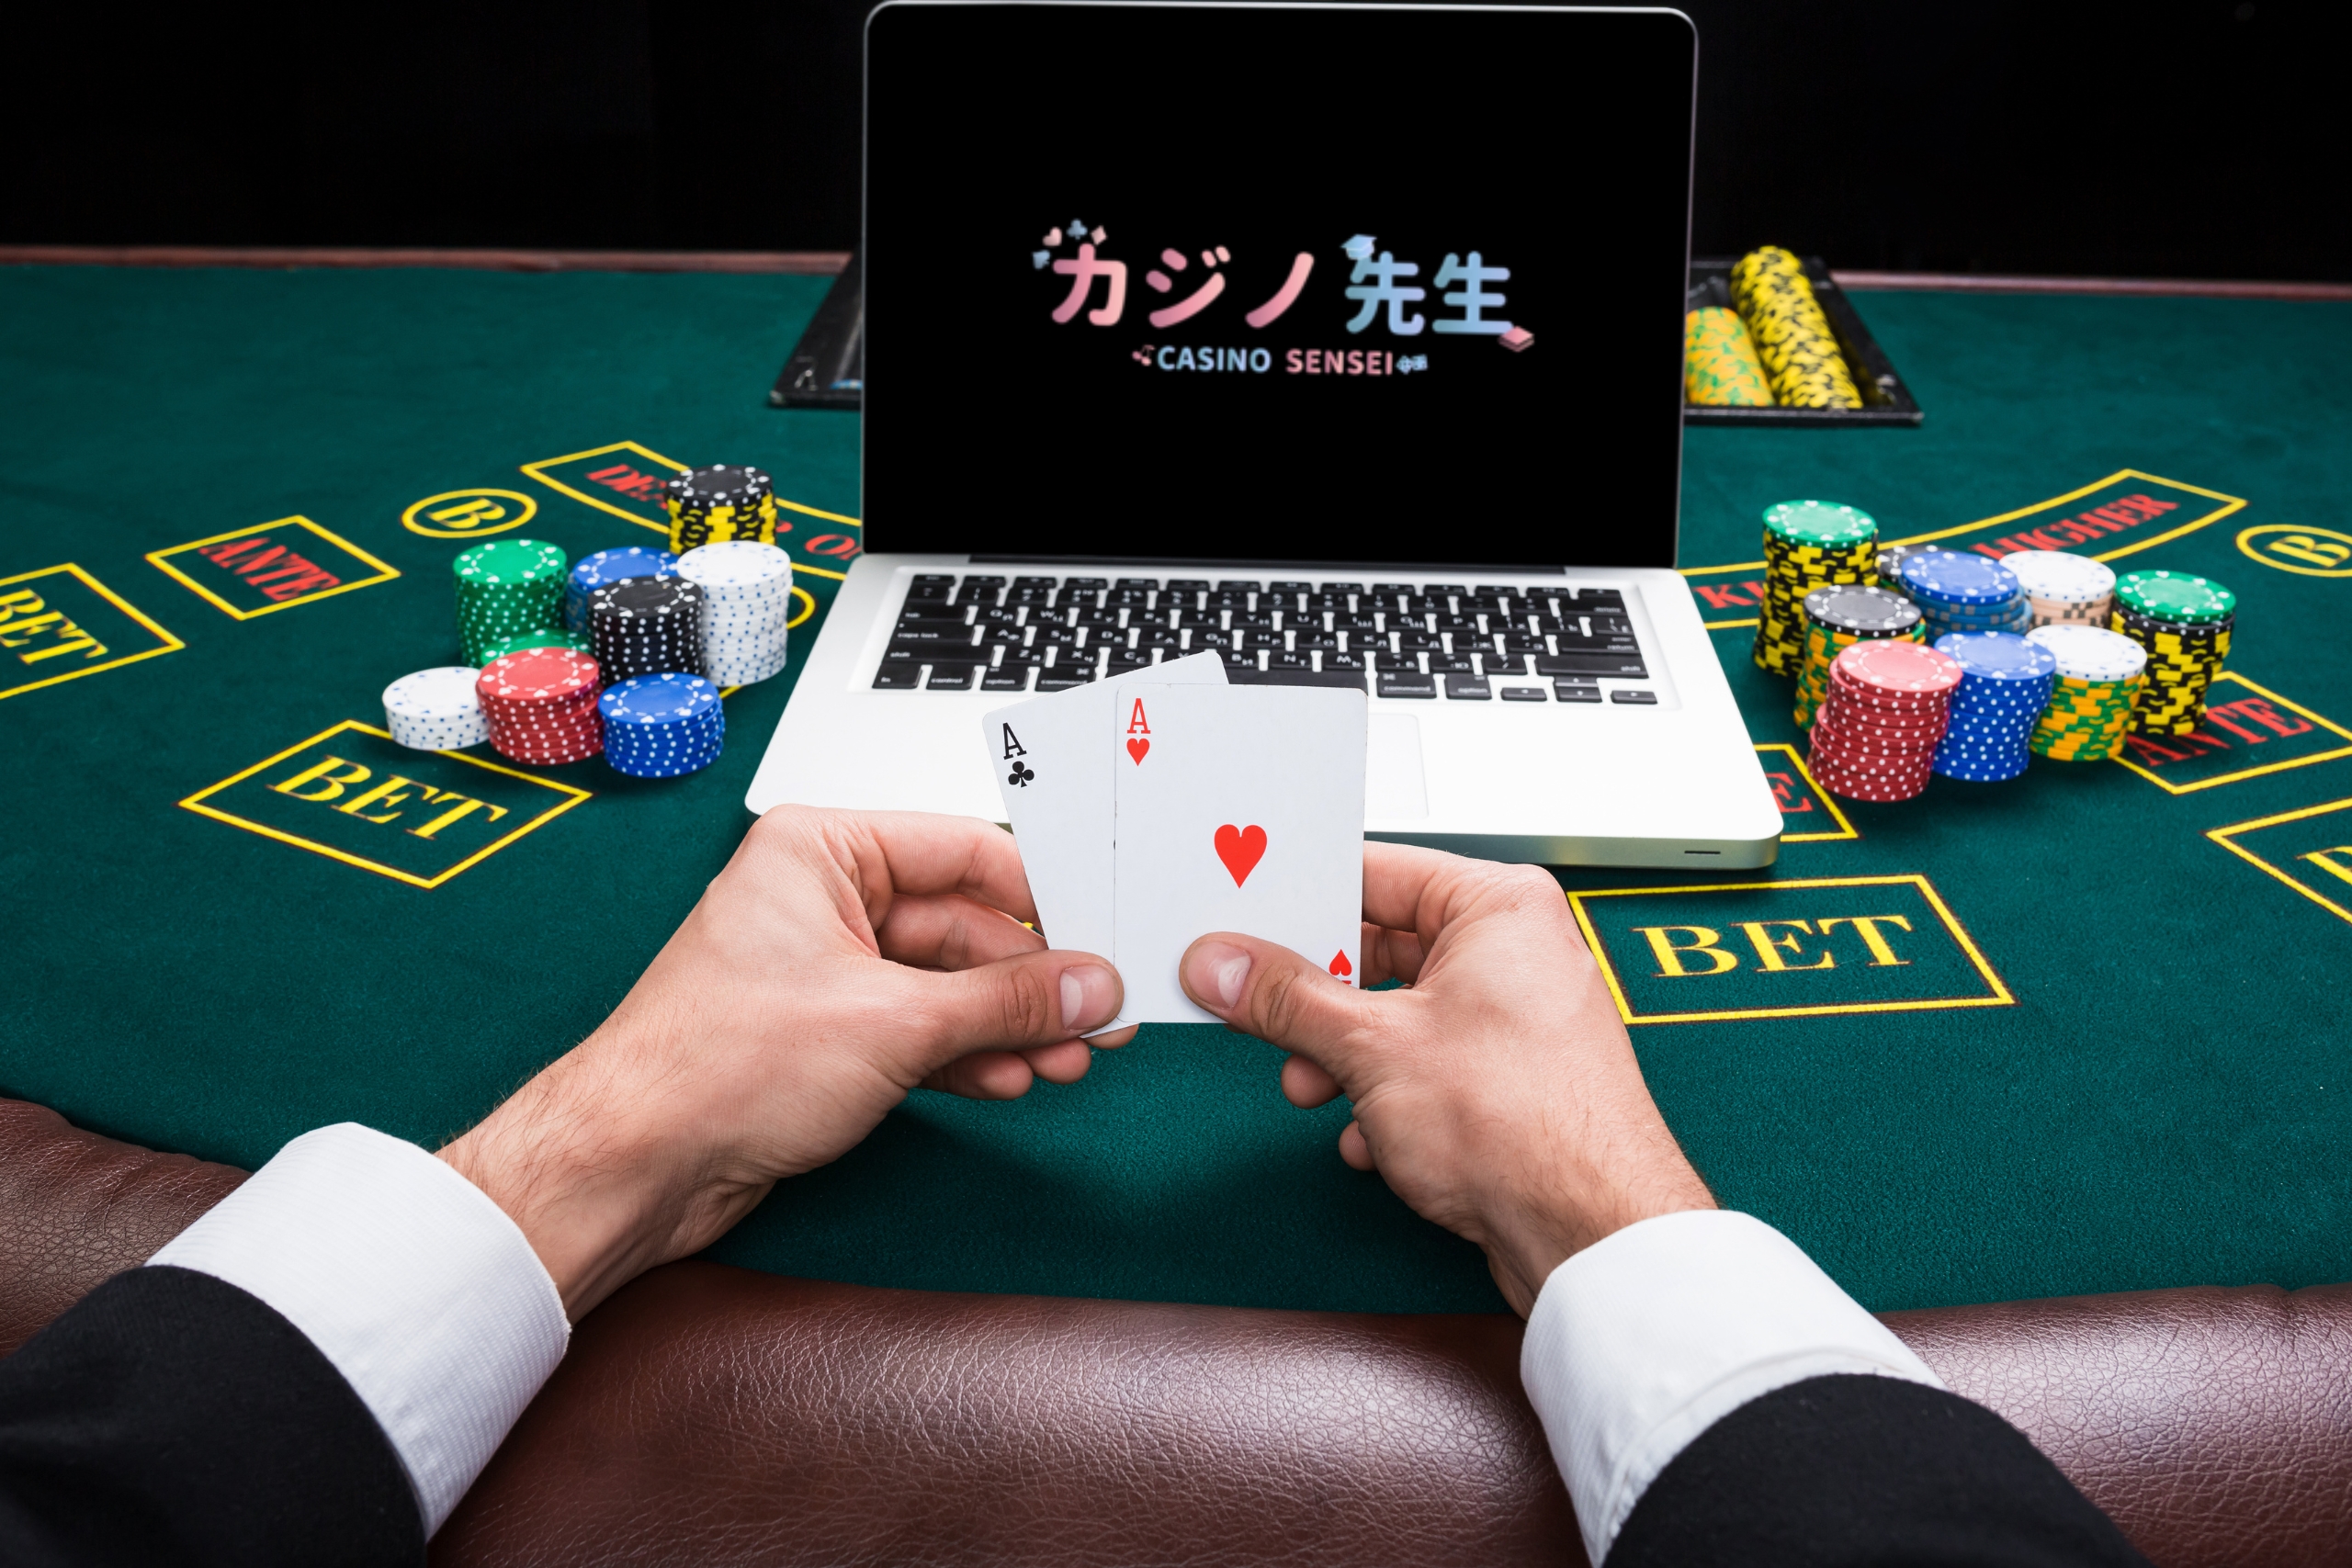 Understanding The Legal Status Of Vera&John Casino And Comparison With South Korean Casinos